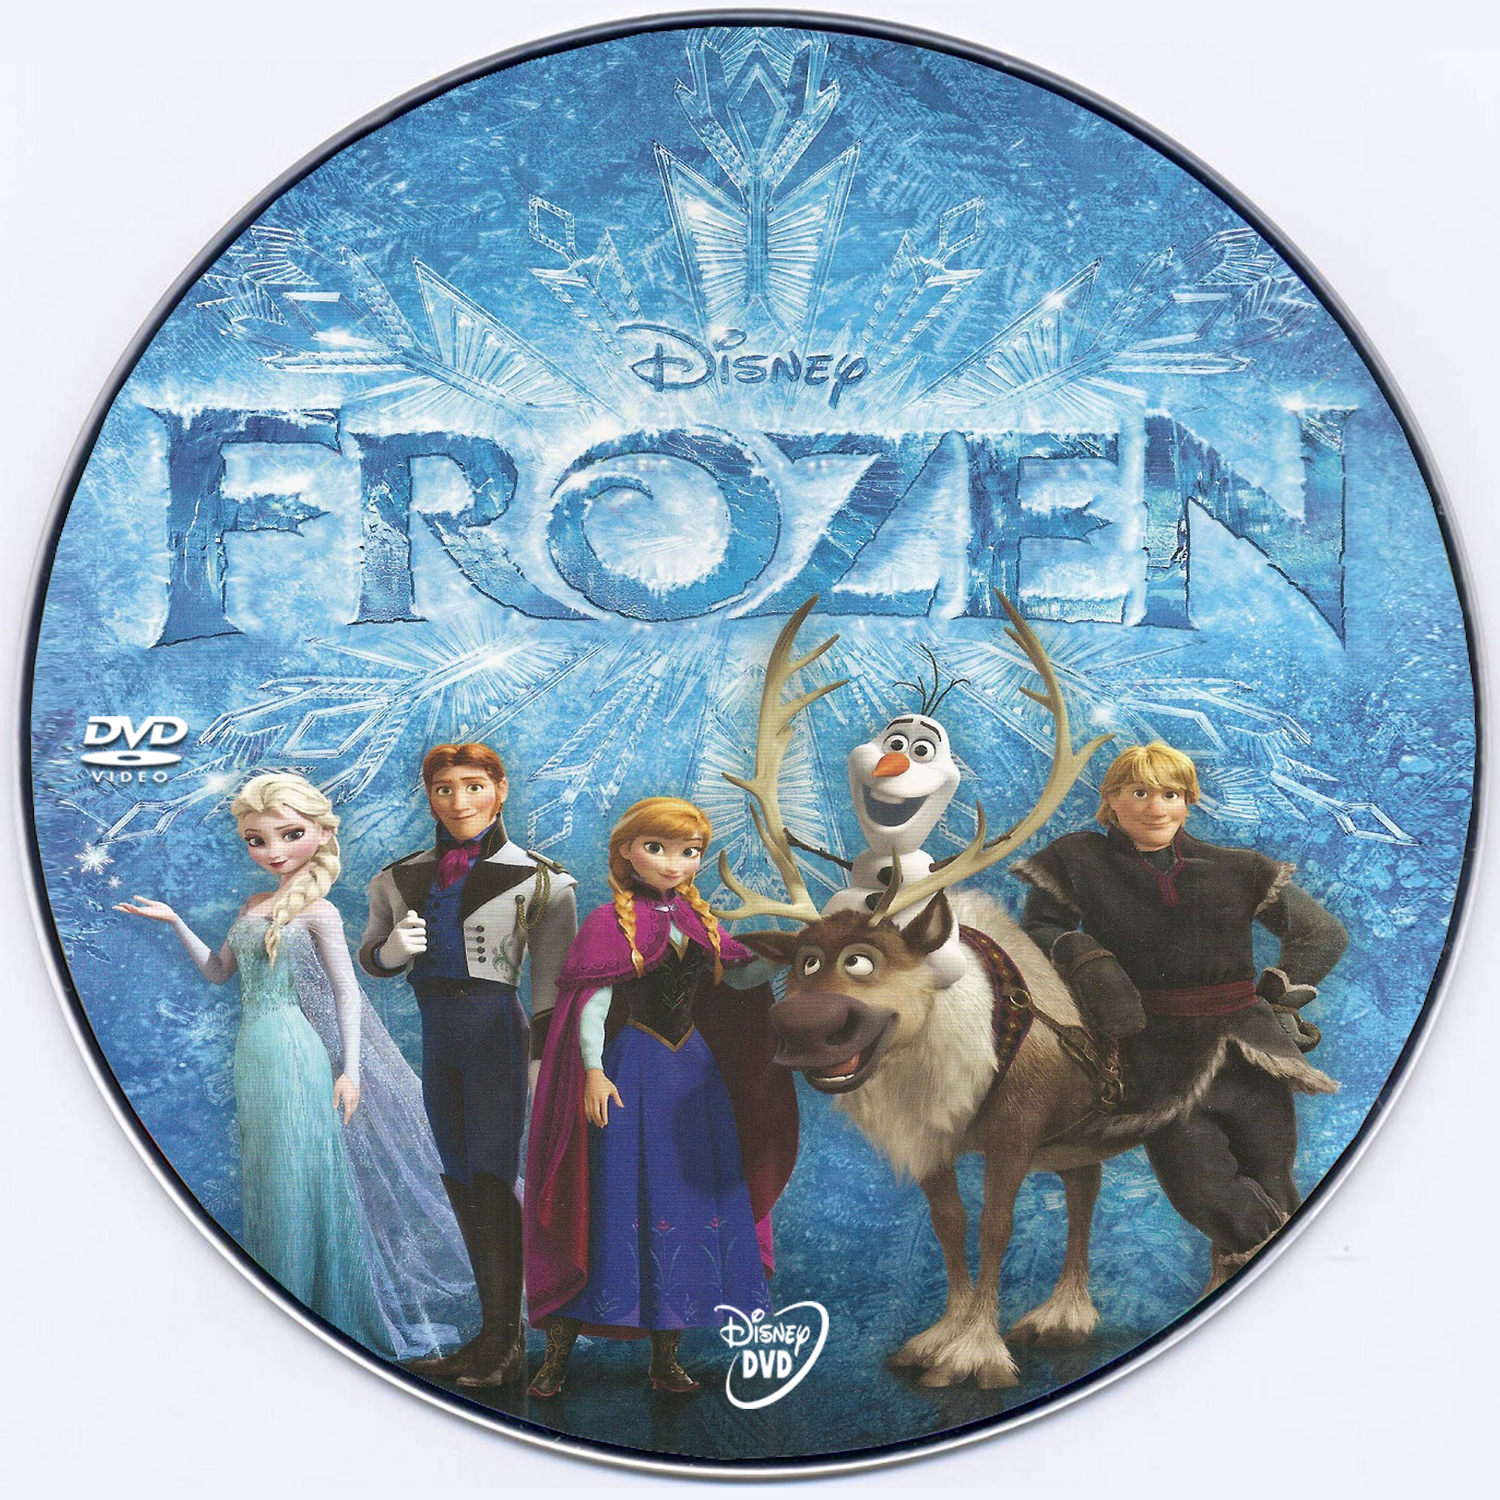 Disney Frozen Cd Dvd Covers Cover Century Over 1 000 000 Album Art Covers For Free